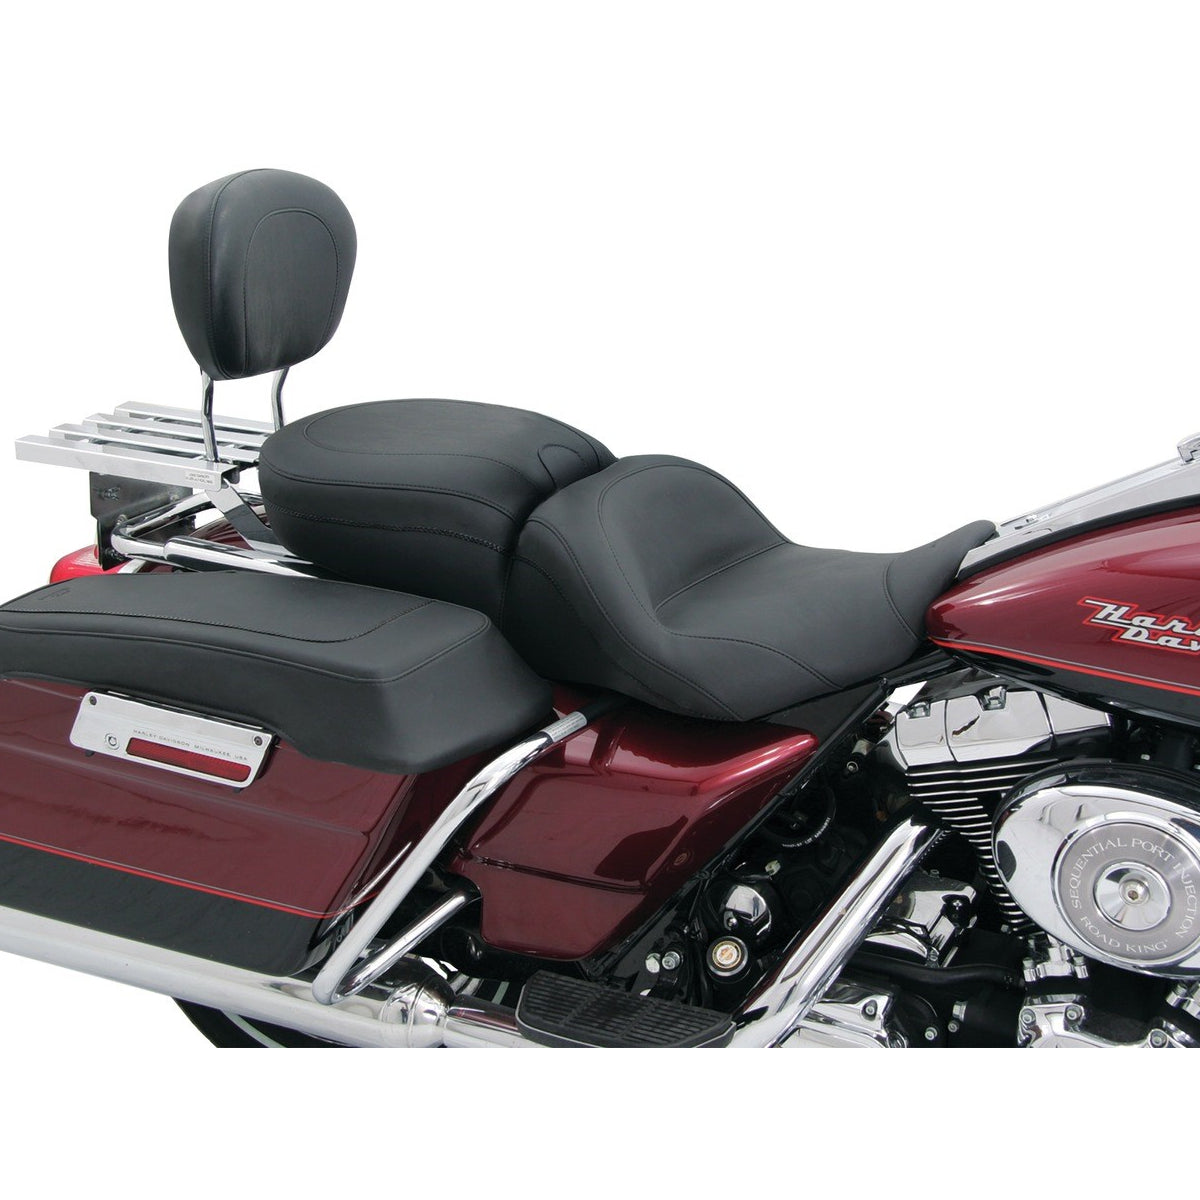 Mustang Sissy Bar Pad for Harley-Davidson Touring '97-'21, Black, Width: 12", Height: 9"